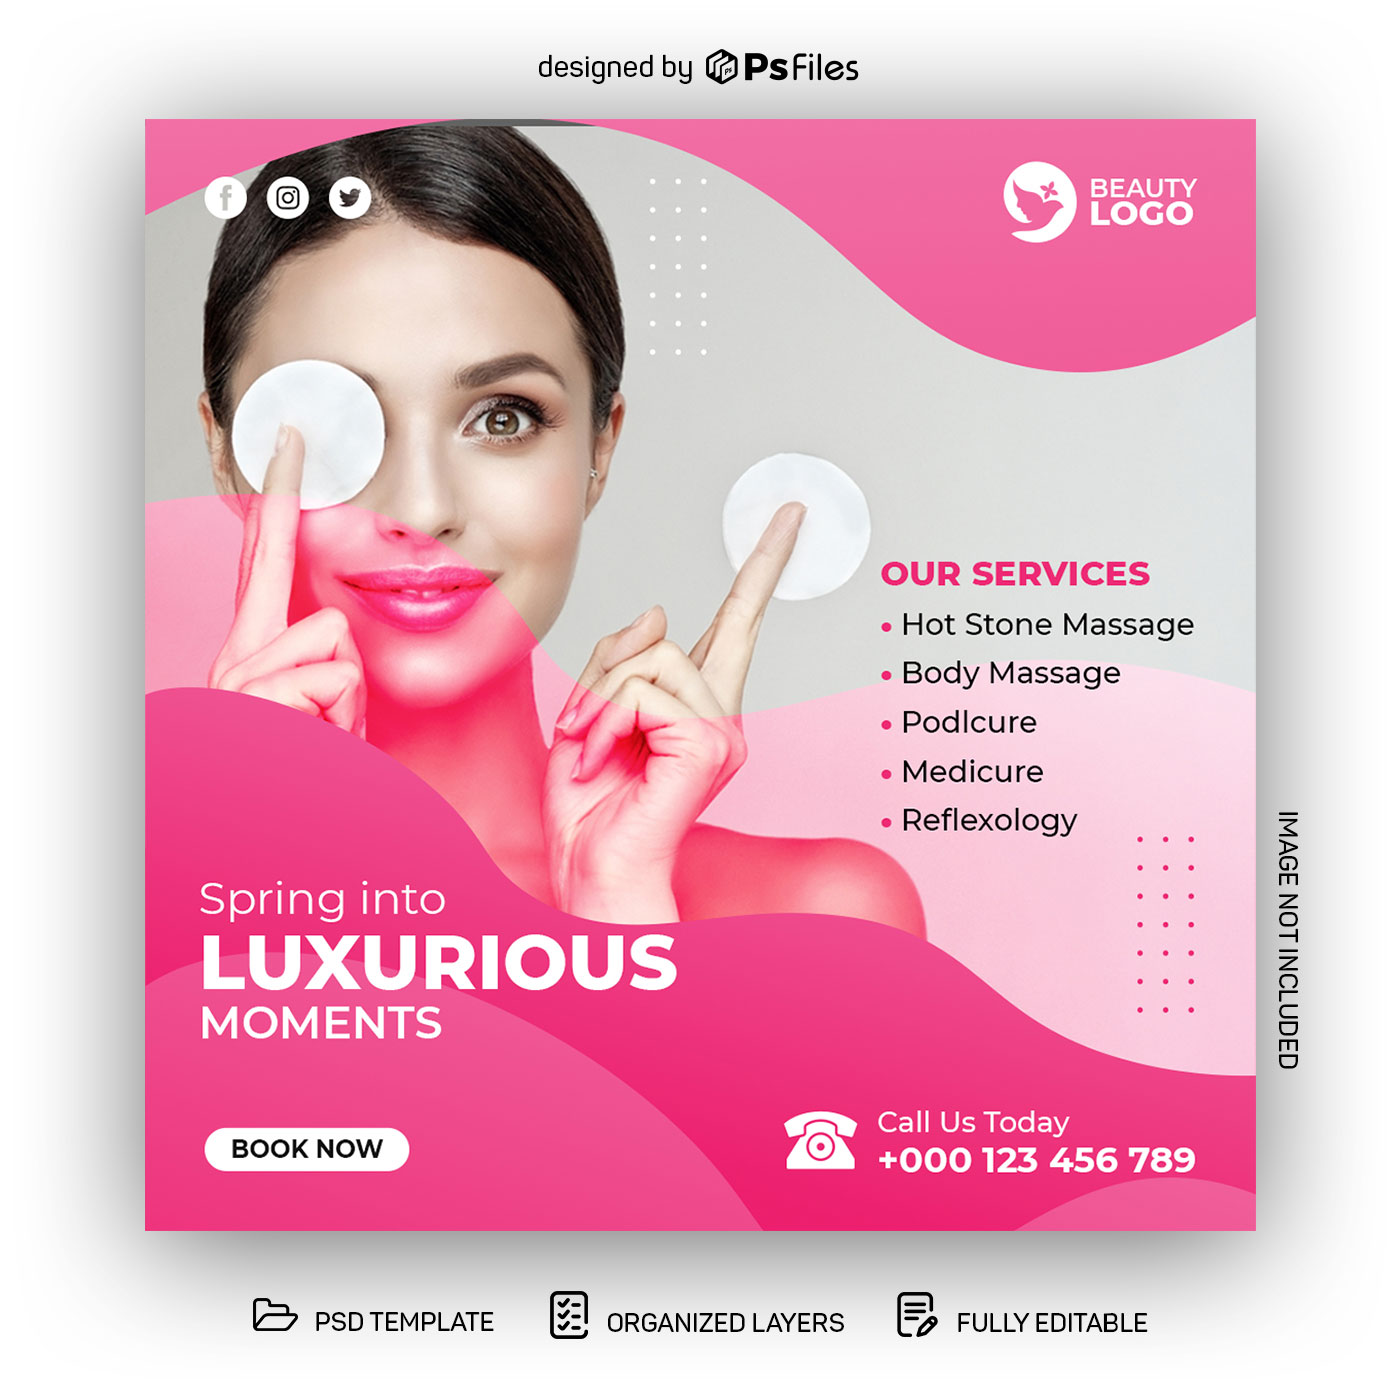 Pink Color theme PsFiles Free Luxurious Beauty Salon Social Media Post Design PSD Template